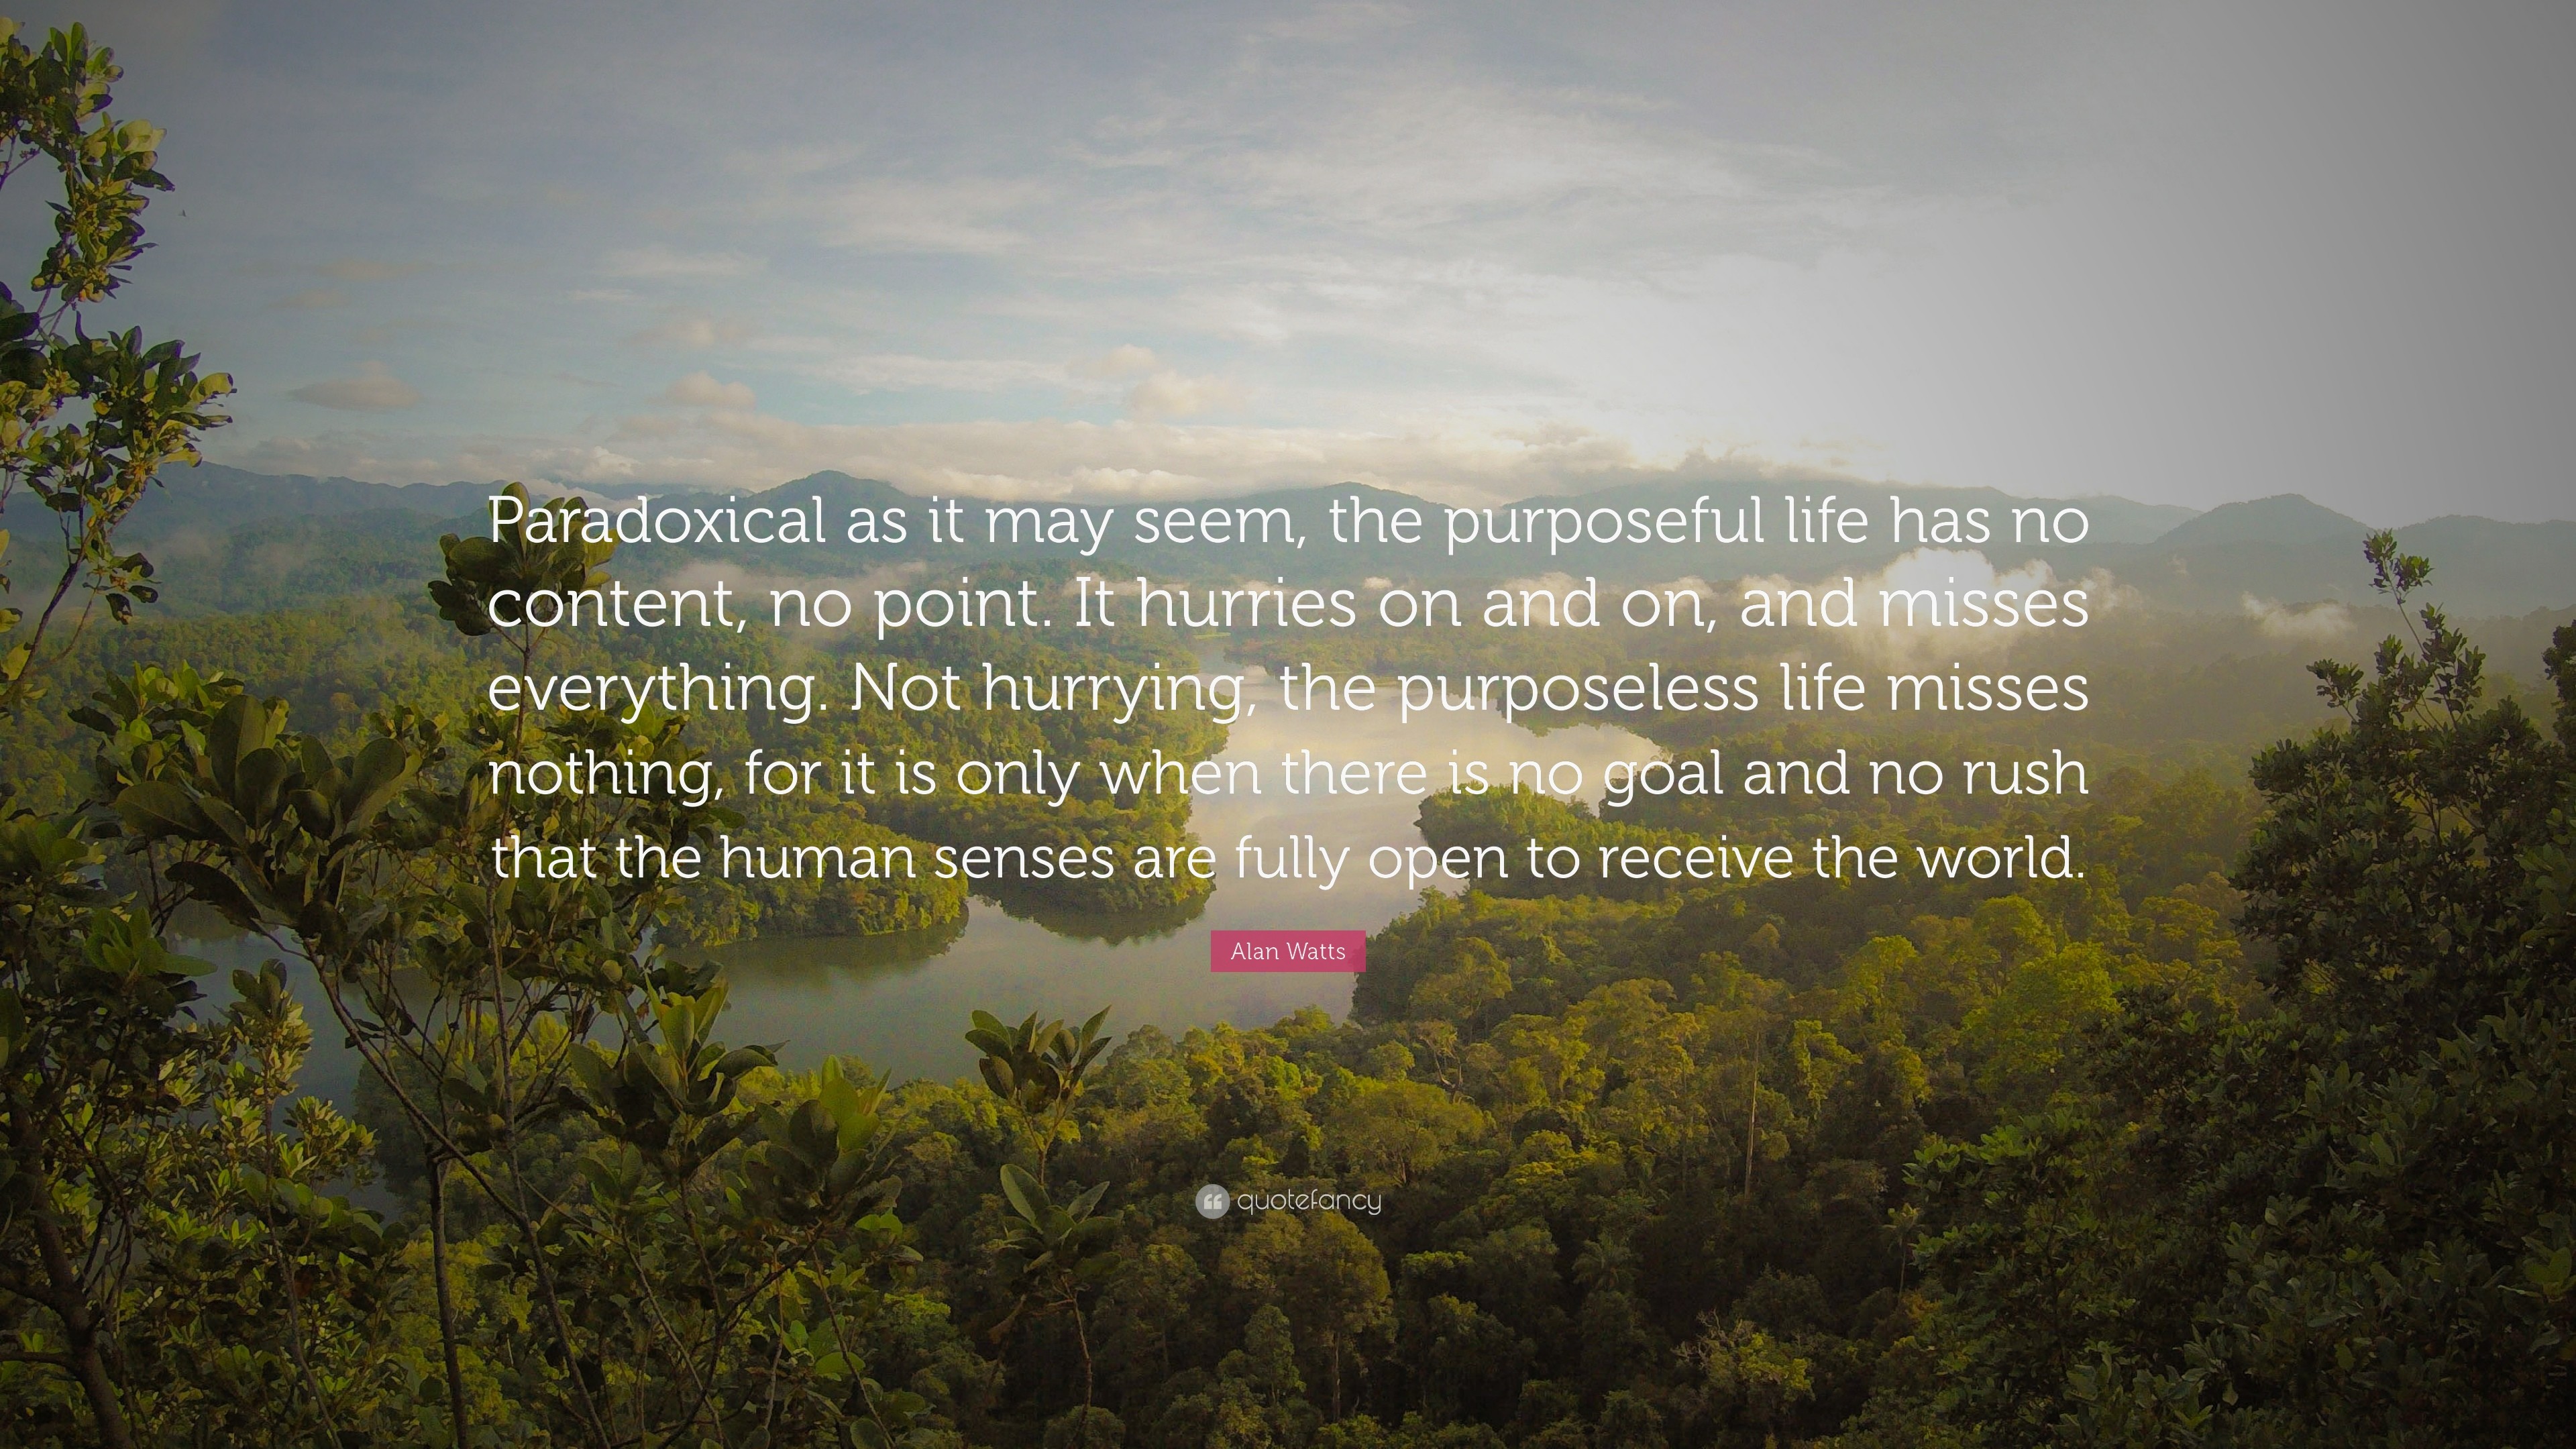 3840x2160 Goal Quotes: “Paradoxical as it may seem, the purposeful life has no content